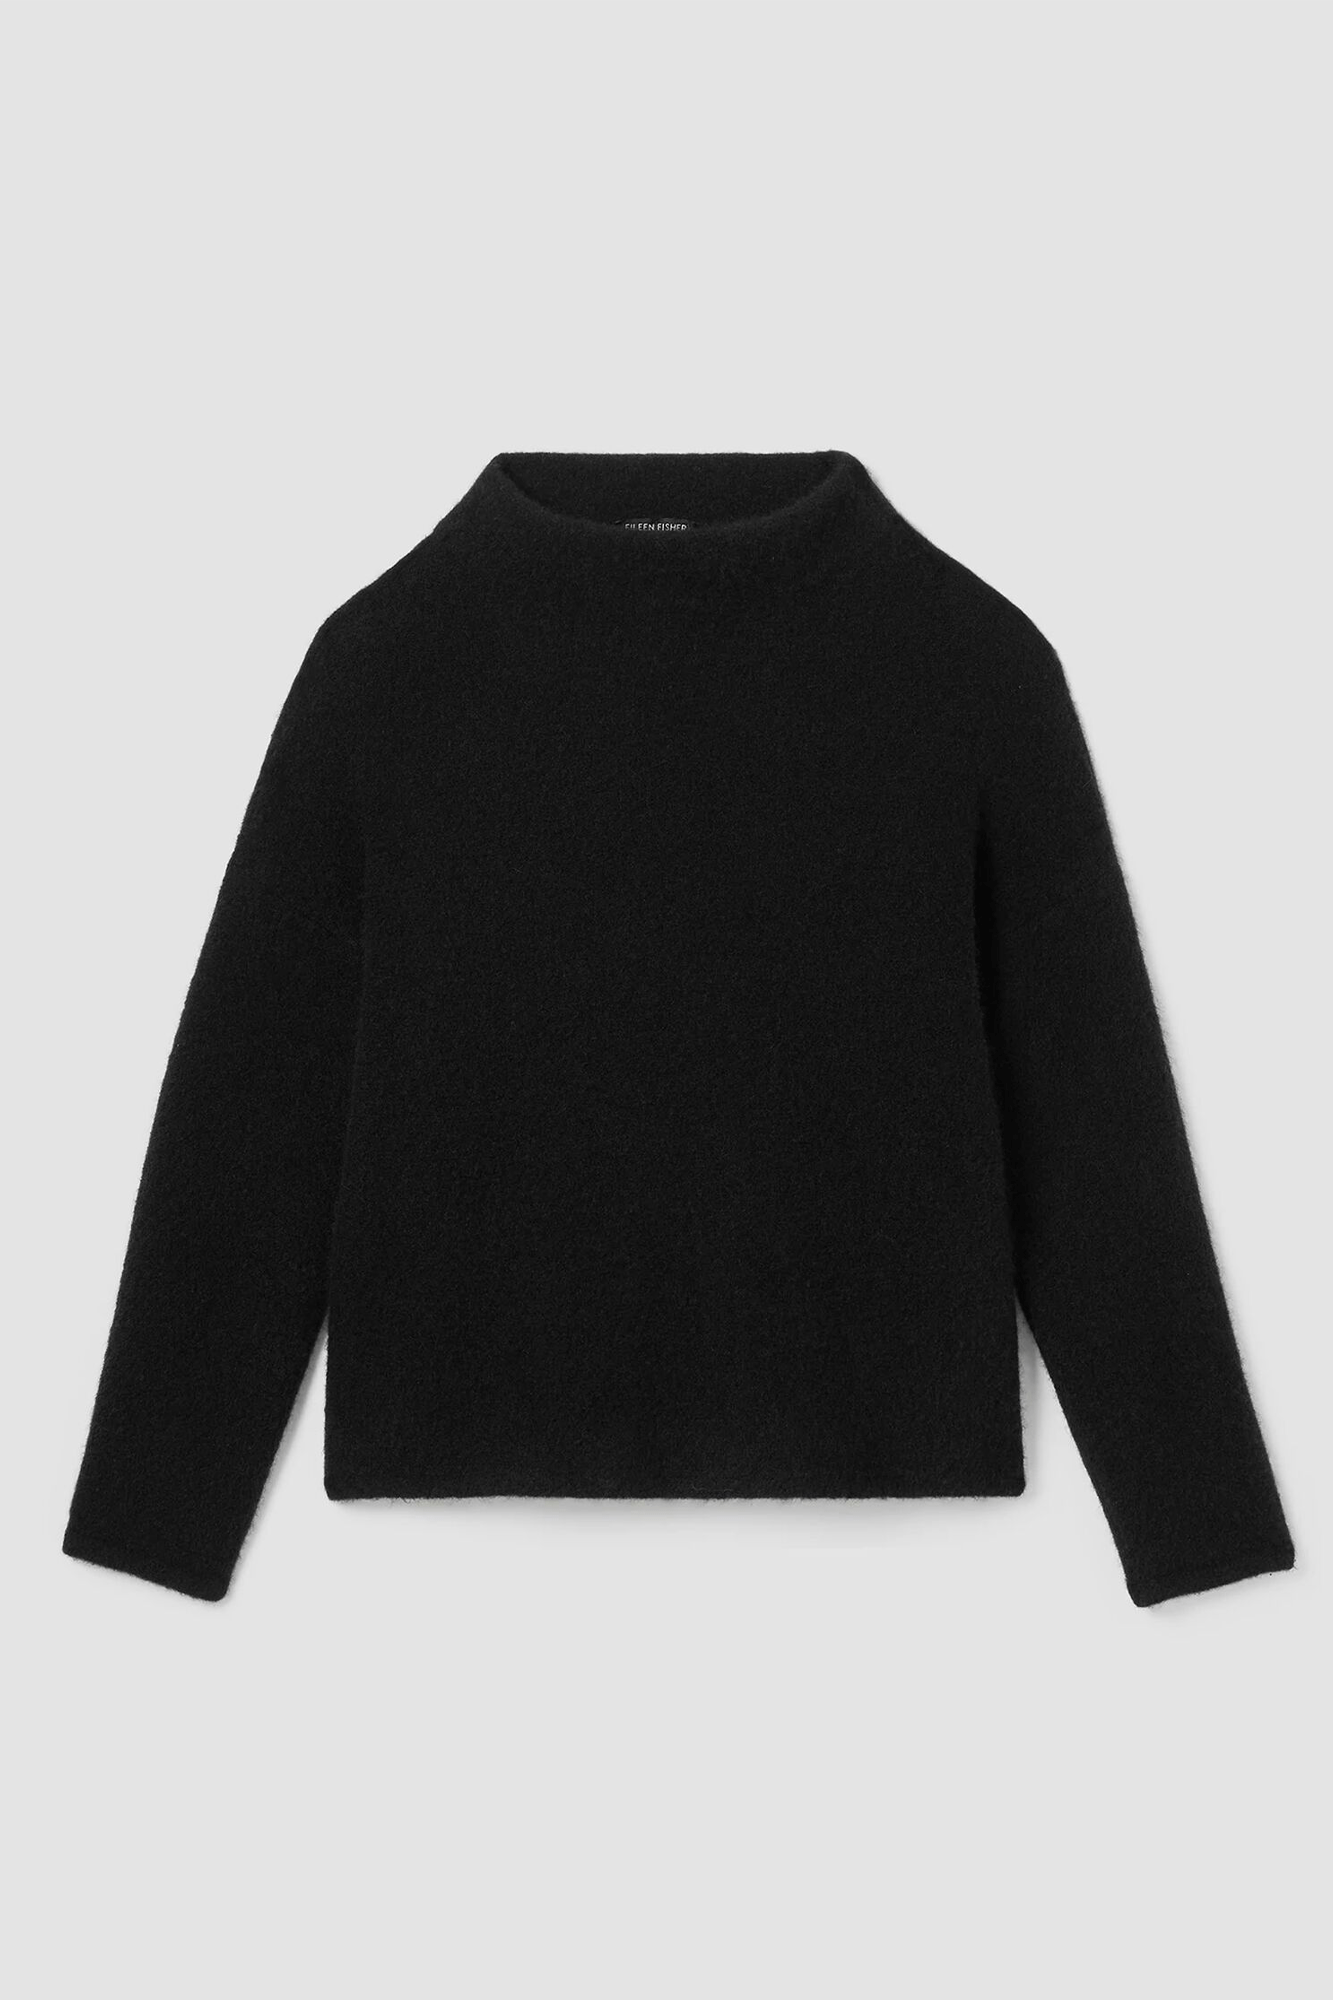 This Funnel Neck Top offers an effortless, luxurious look. Crafted from a soft blend of cashmere and silk, it adds subtle luxury to any wardrobe. Its classic funnel neckline adds a touch of elegance and an effortlessly chic look.